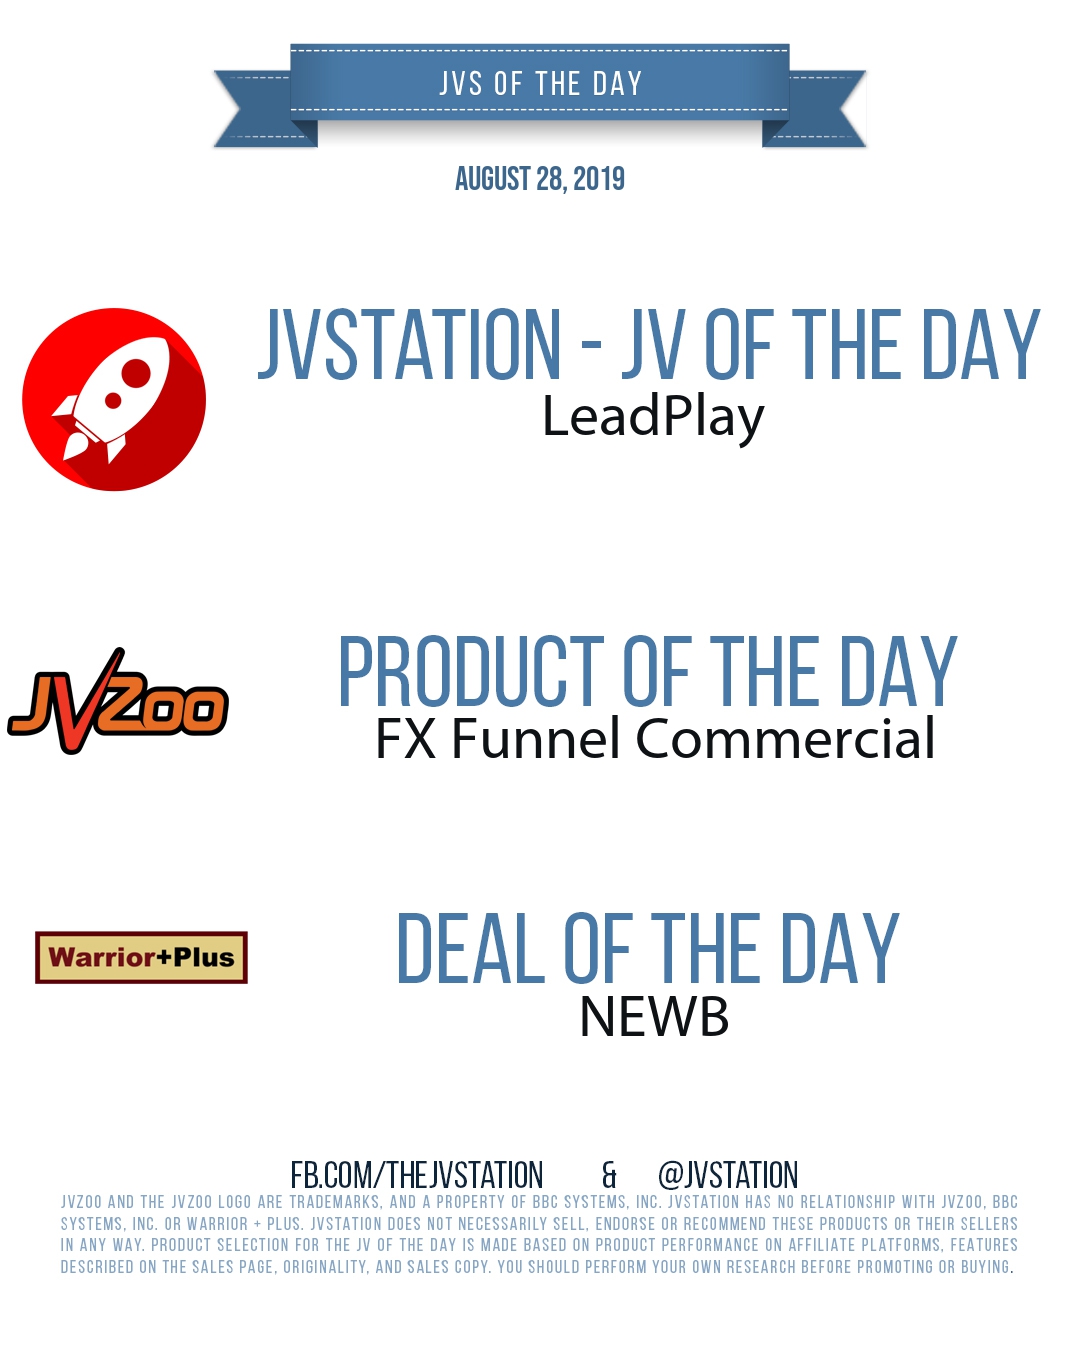 JVs of the day - August 28, 2019